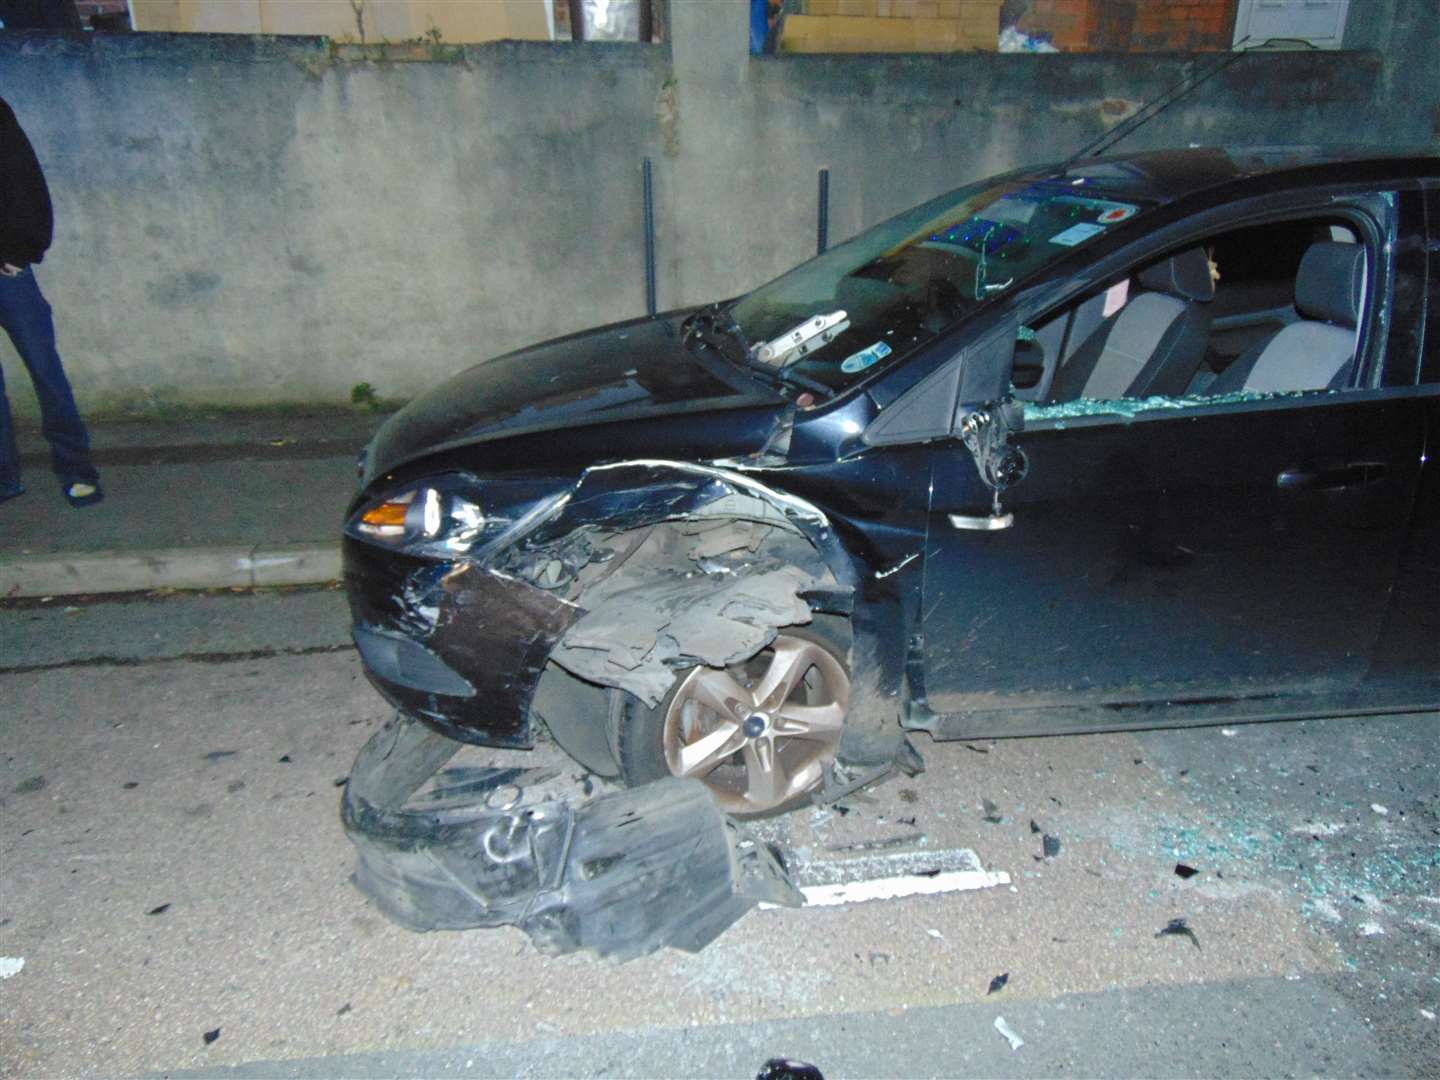 Cars were damaged during the crash in Corporation Road, Gillingham